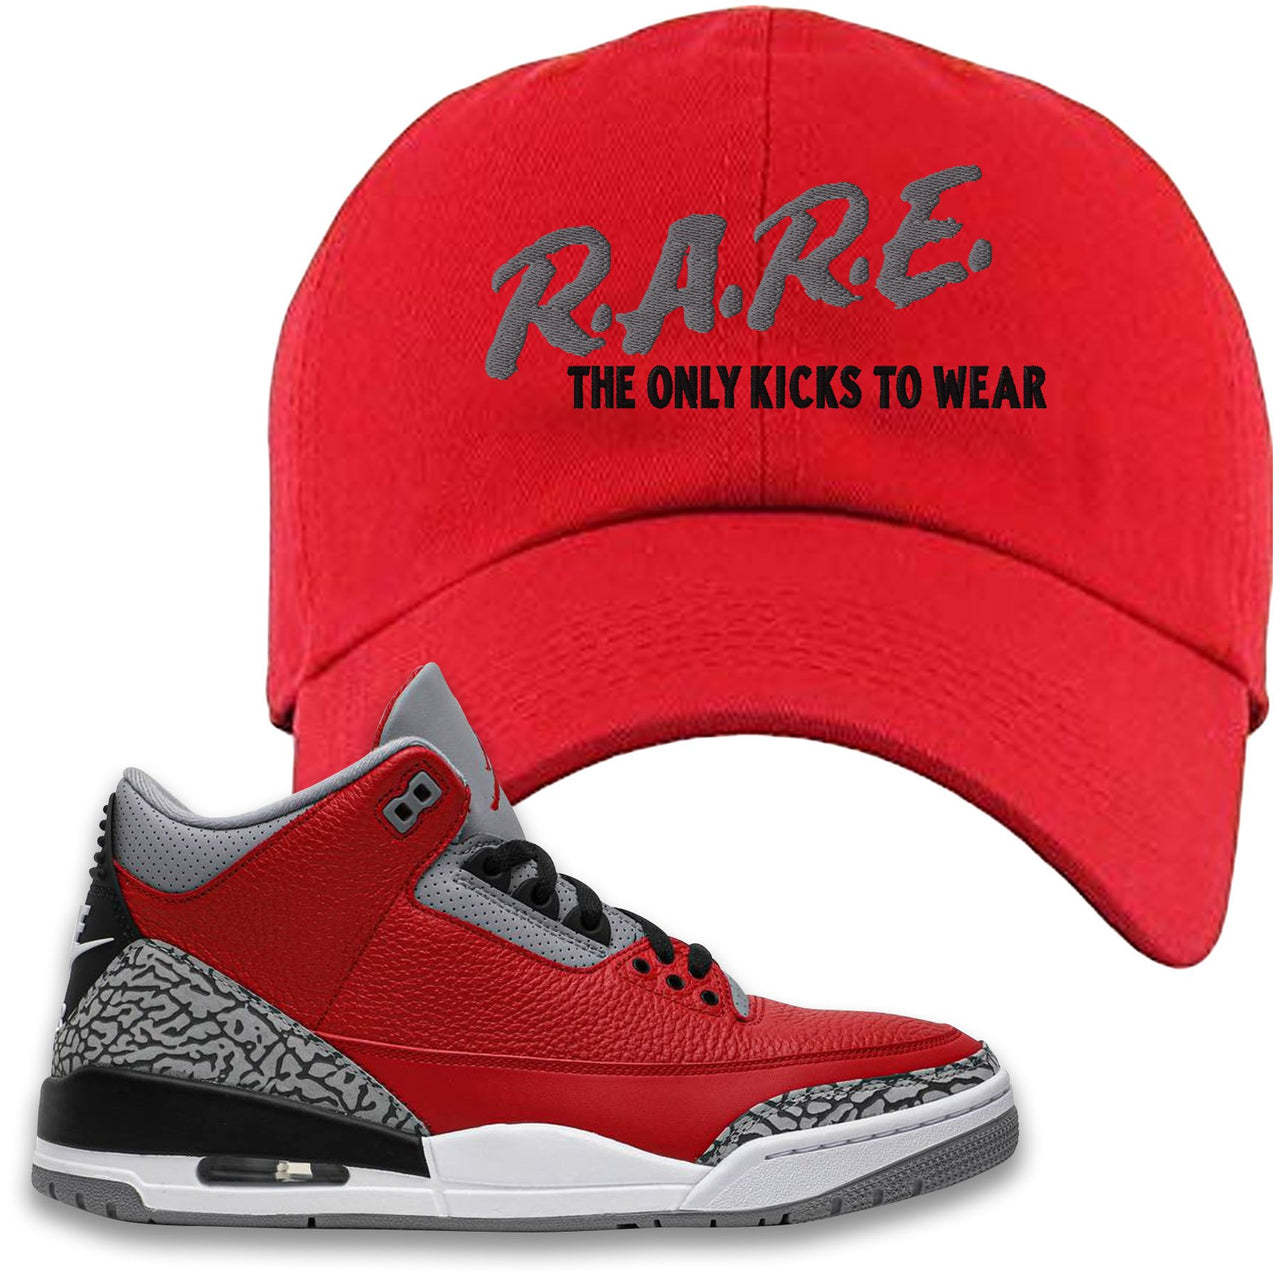 Chicago Exclusive Jordan 3 Red Cement Sneaker Red Dad Hat | Hat to match Jordan 3 All Star Red Cement Shoes | Rare